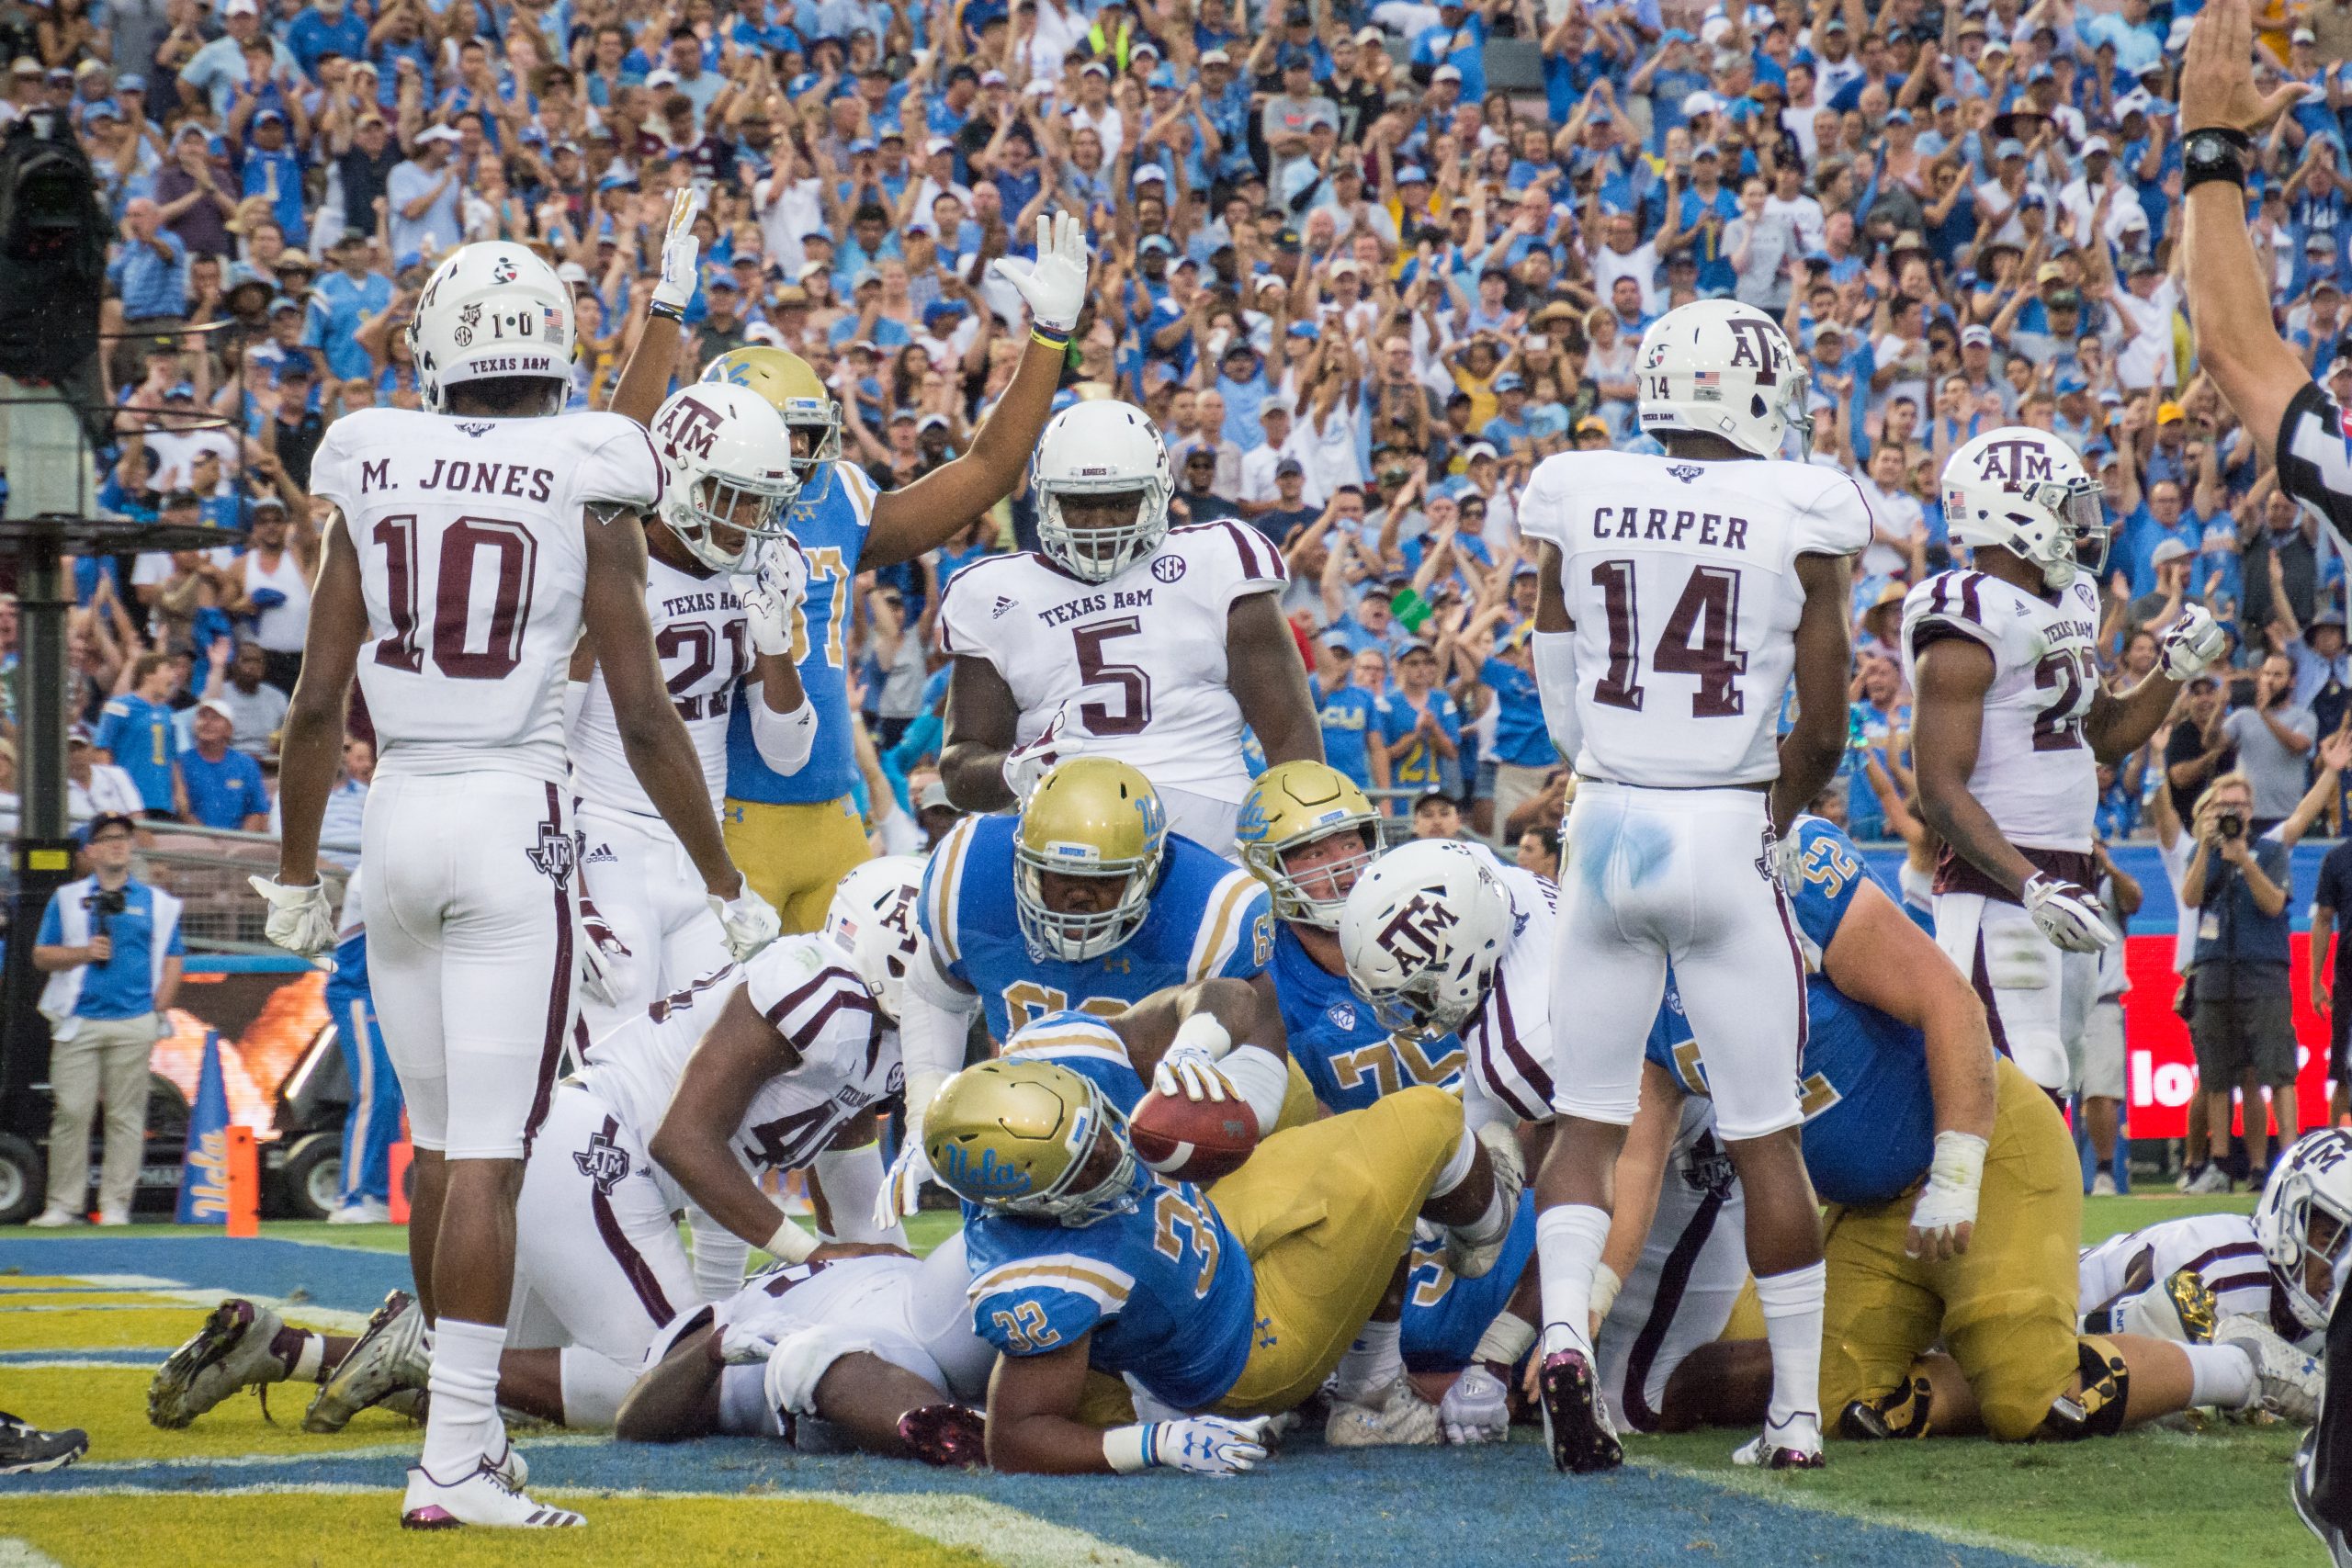 Texas+A%26M+Aggies+vs.+UCLA+Bruins+at+The+Rose+Bowl